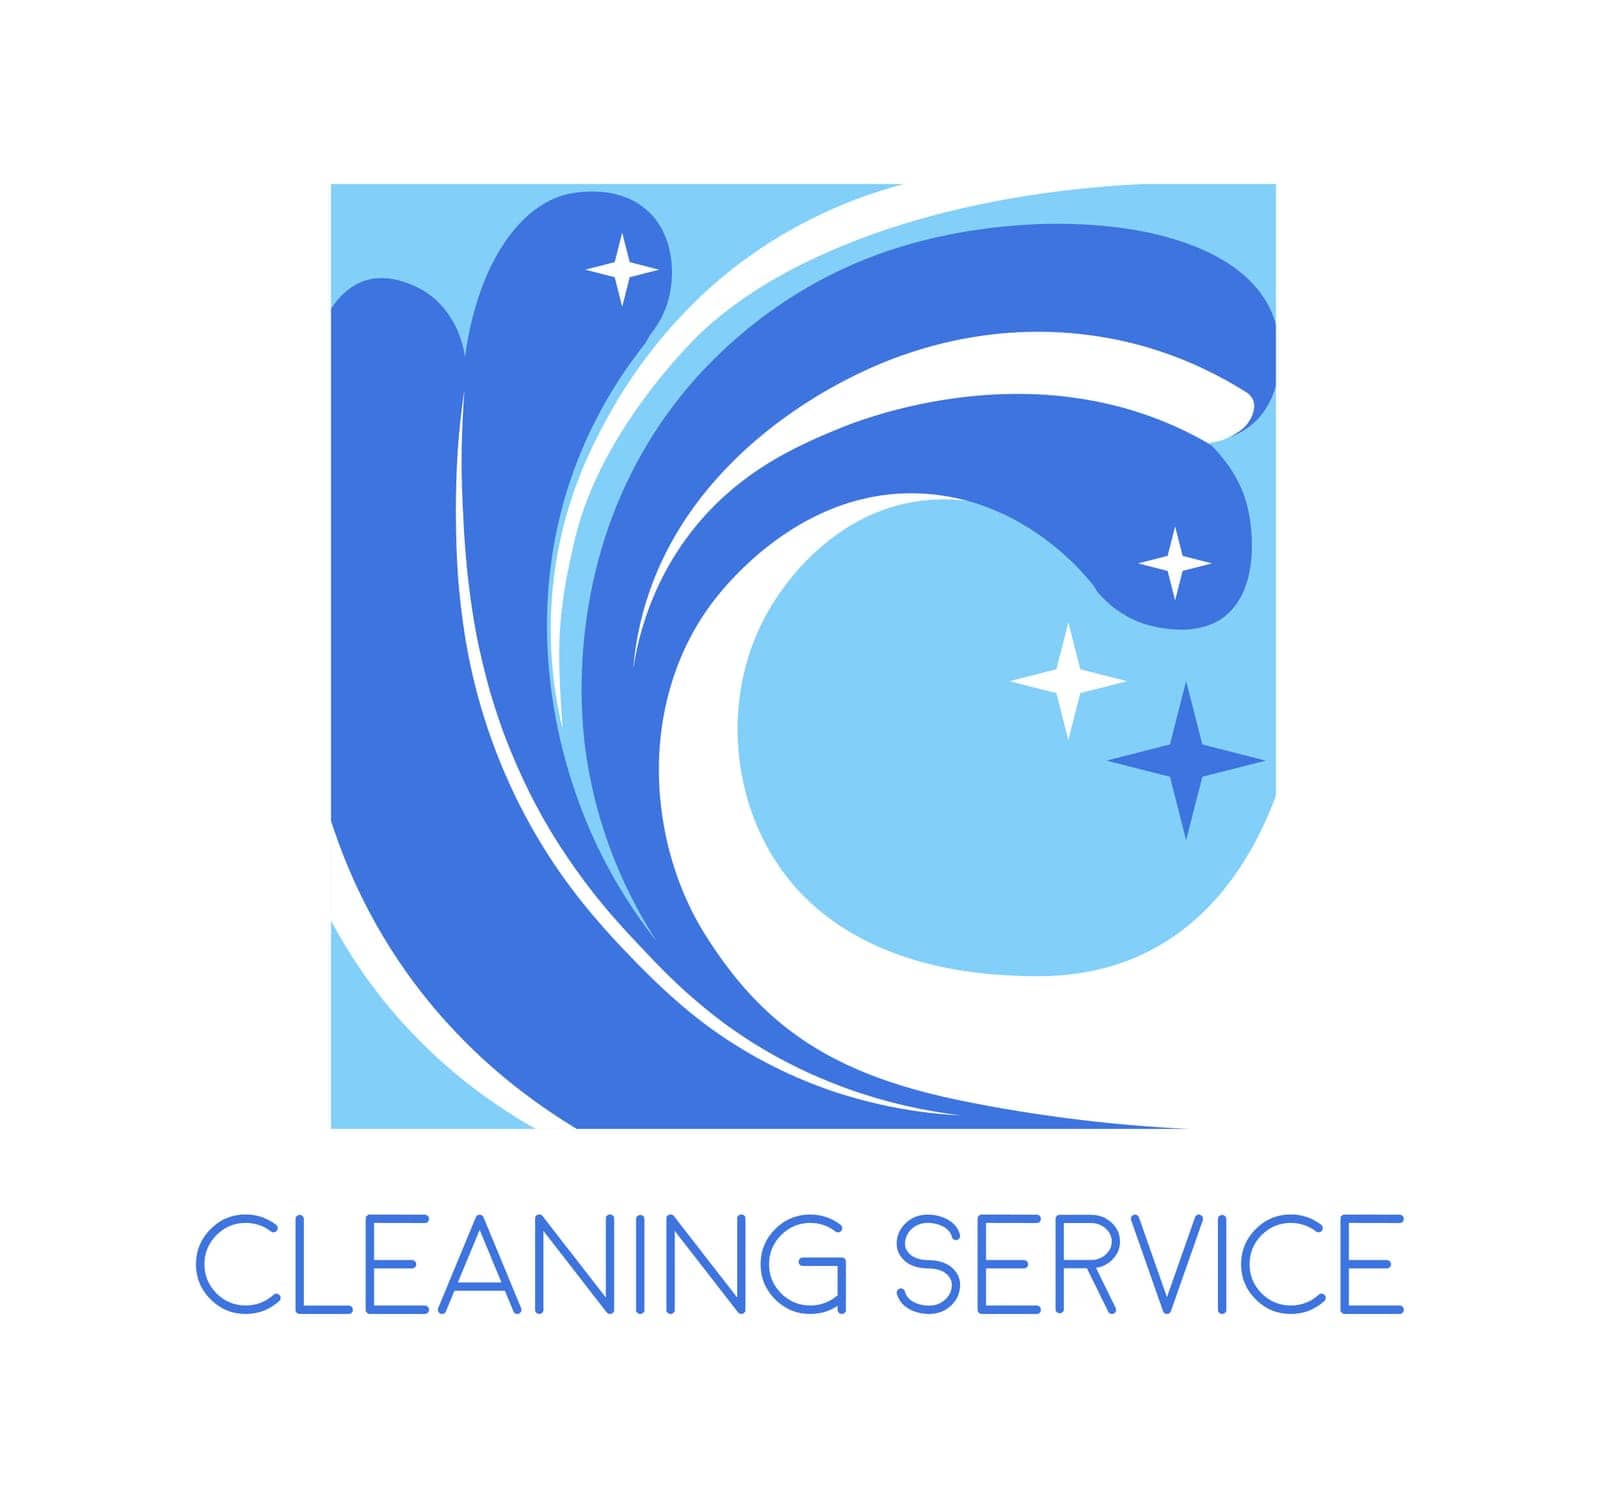 Household maintenance and shores, keeping home clean. Assistance with tidying up, service helping with cleaning. Sanitation and hygiene. Emblem or label, badge or logotype. Vector in flat style